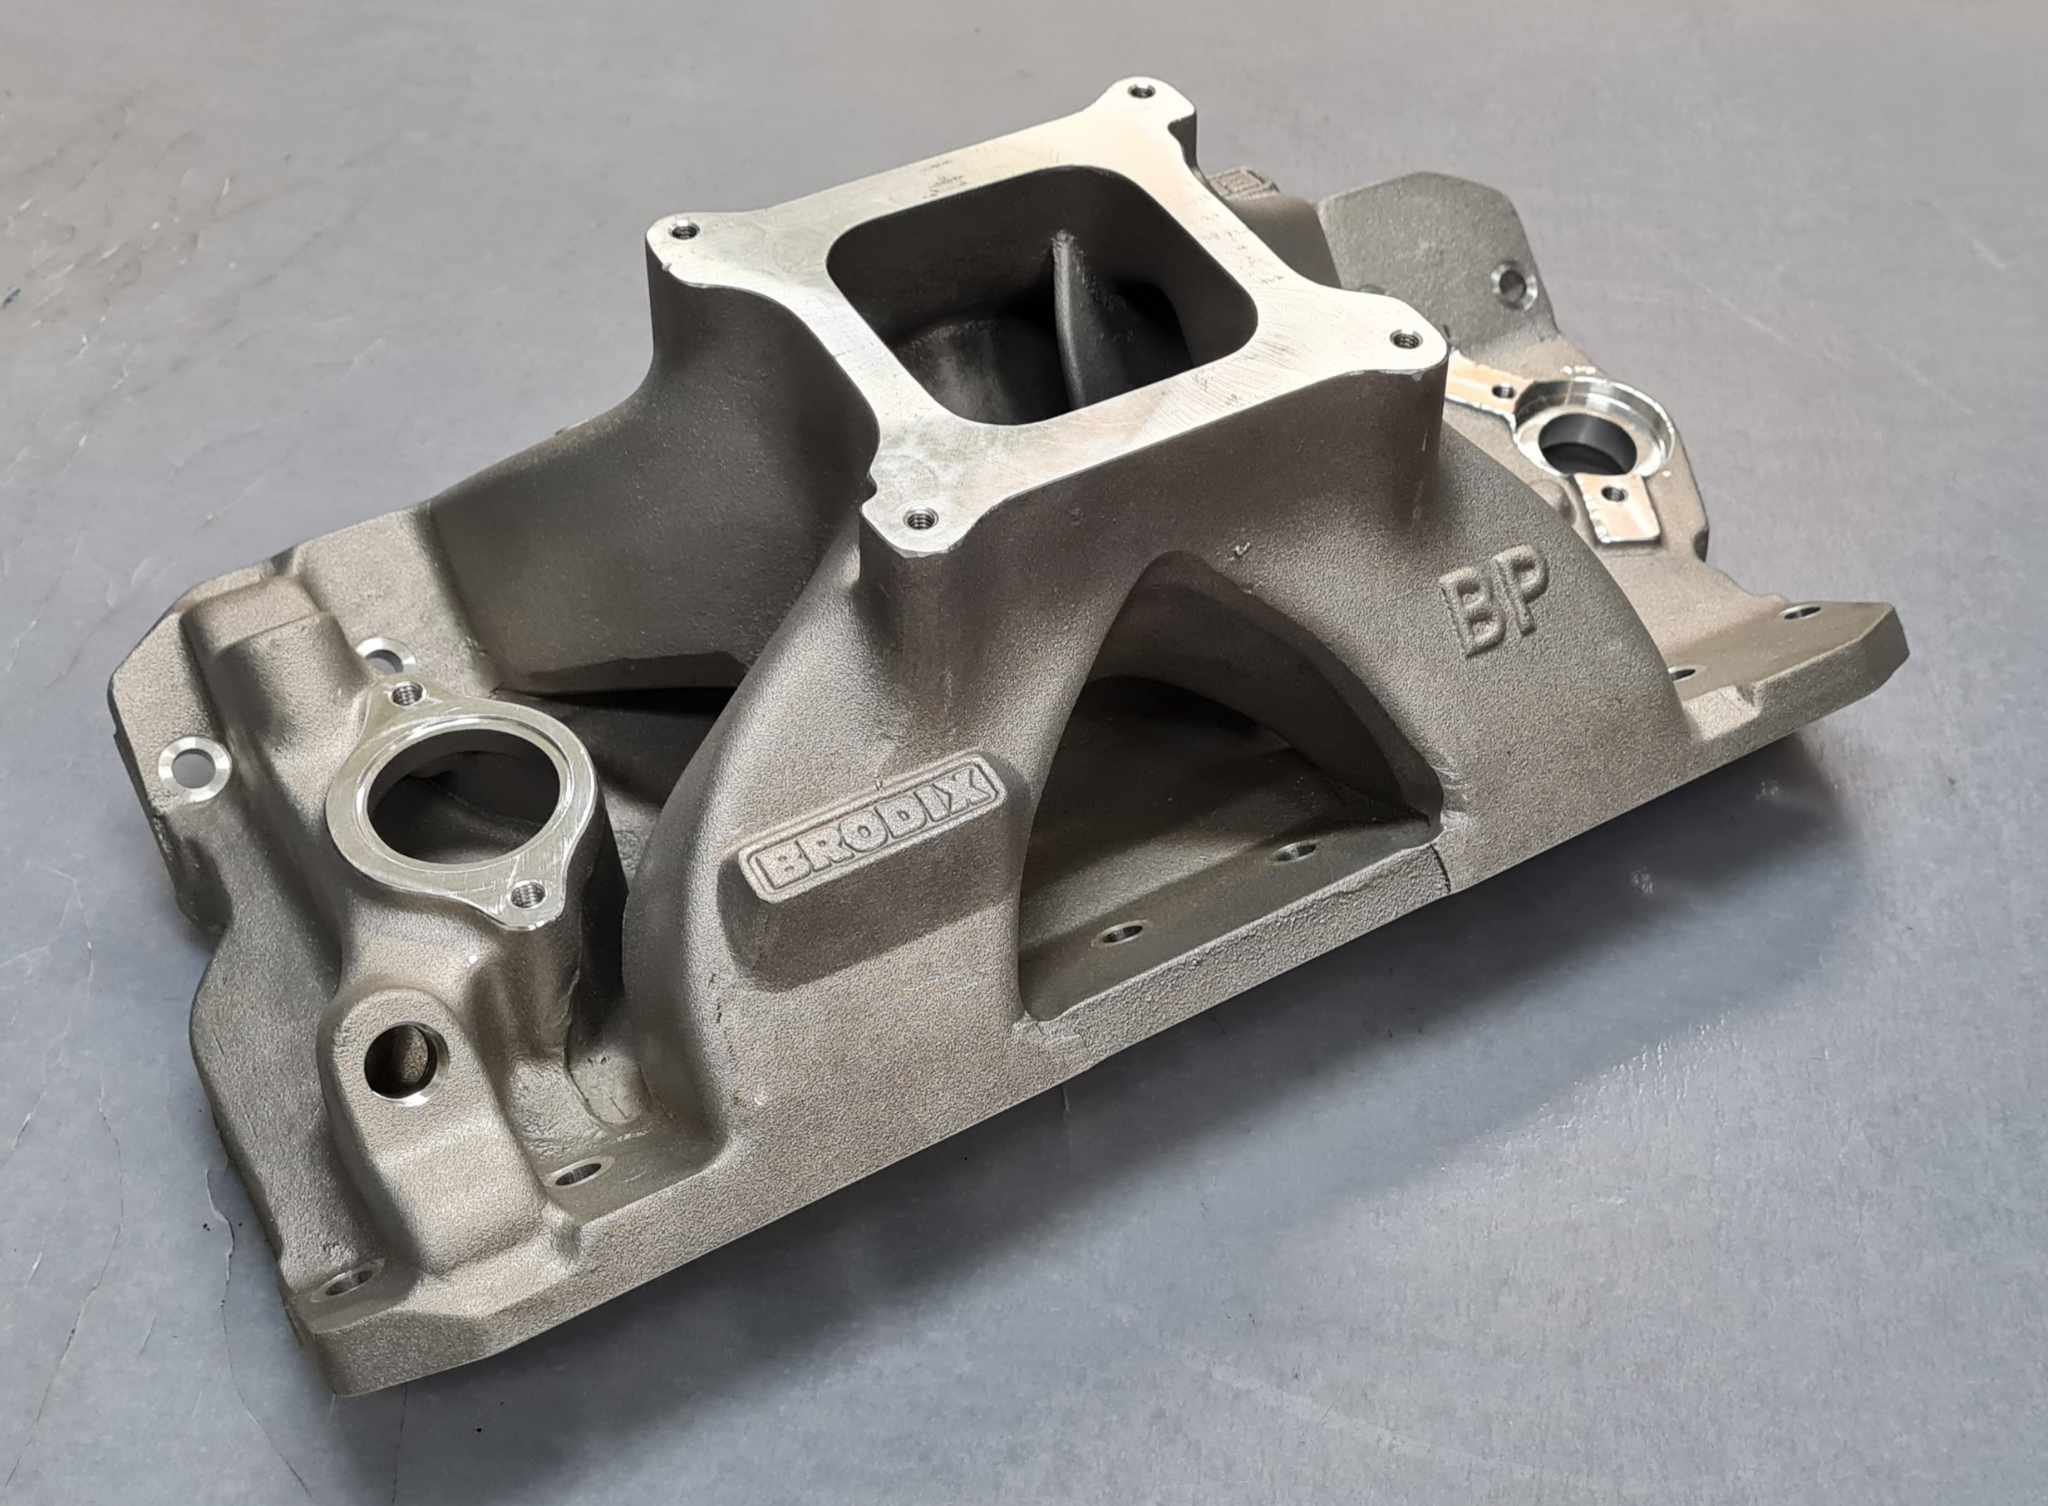 Brodix HV 1500 Series Intake Manifold Suit Small Block Chevy With Brodix WP 15 Series Heads